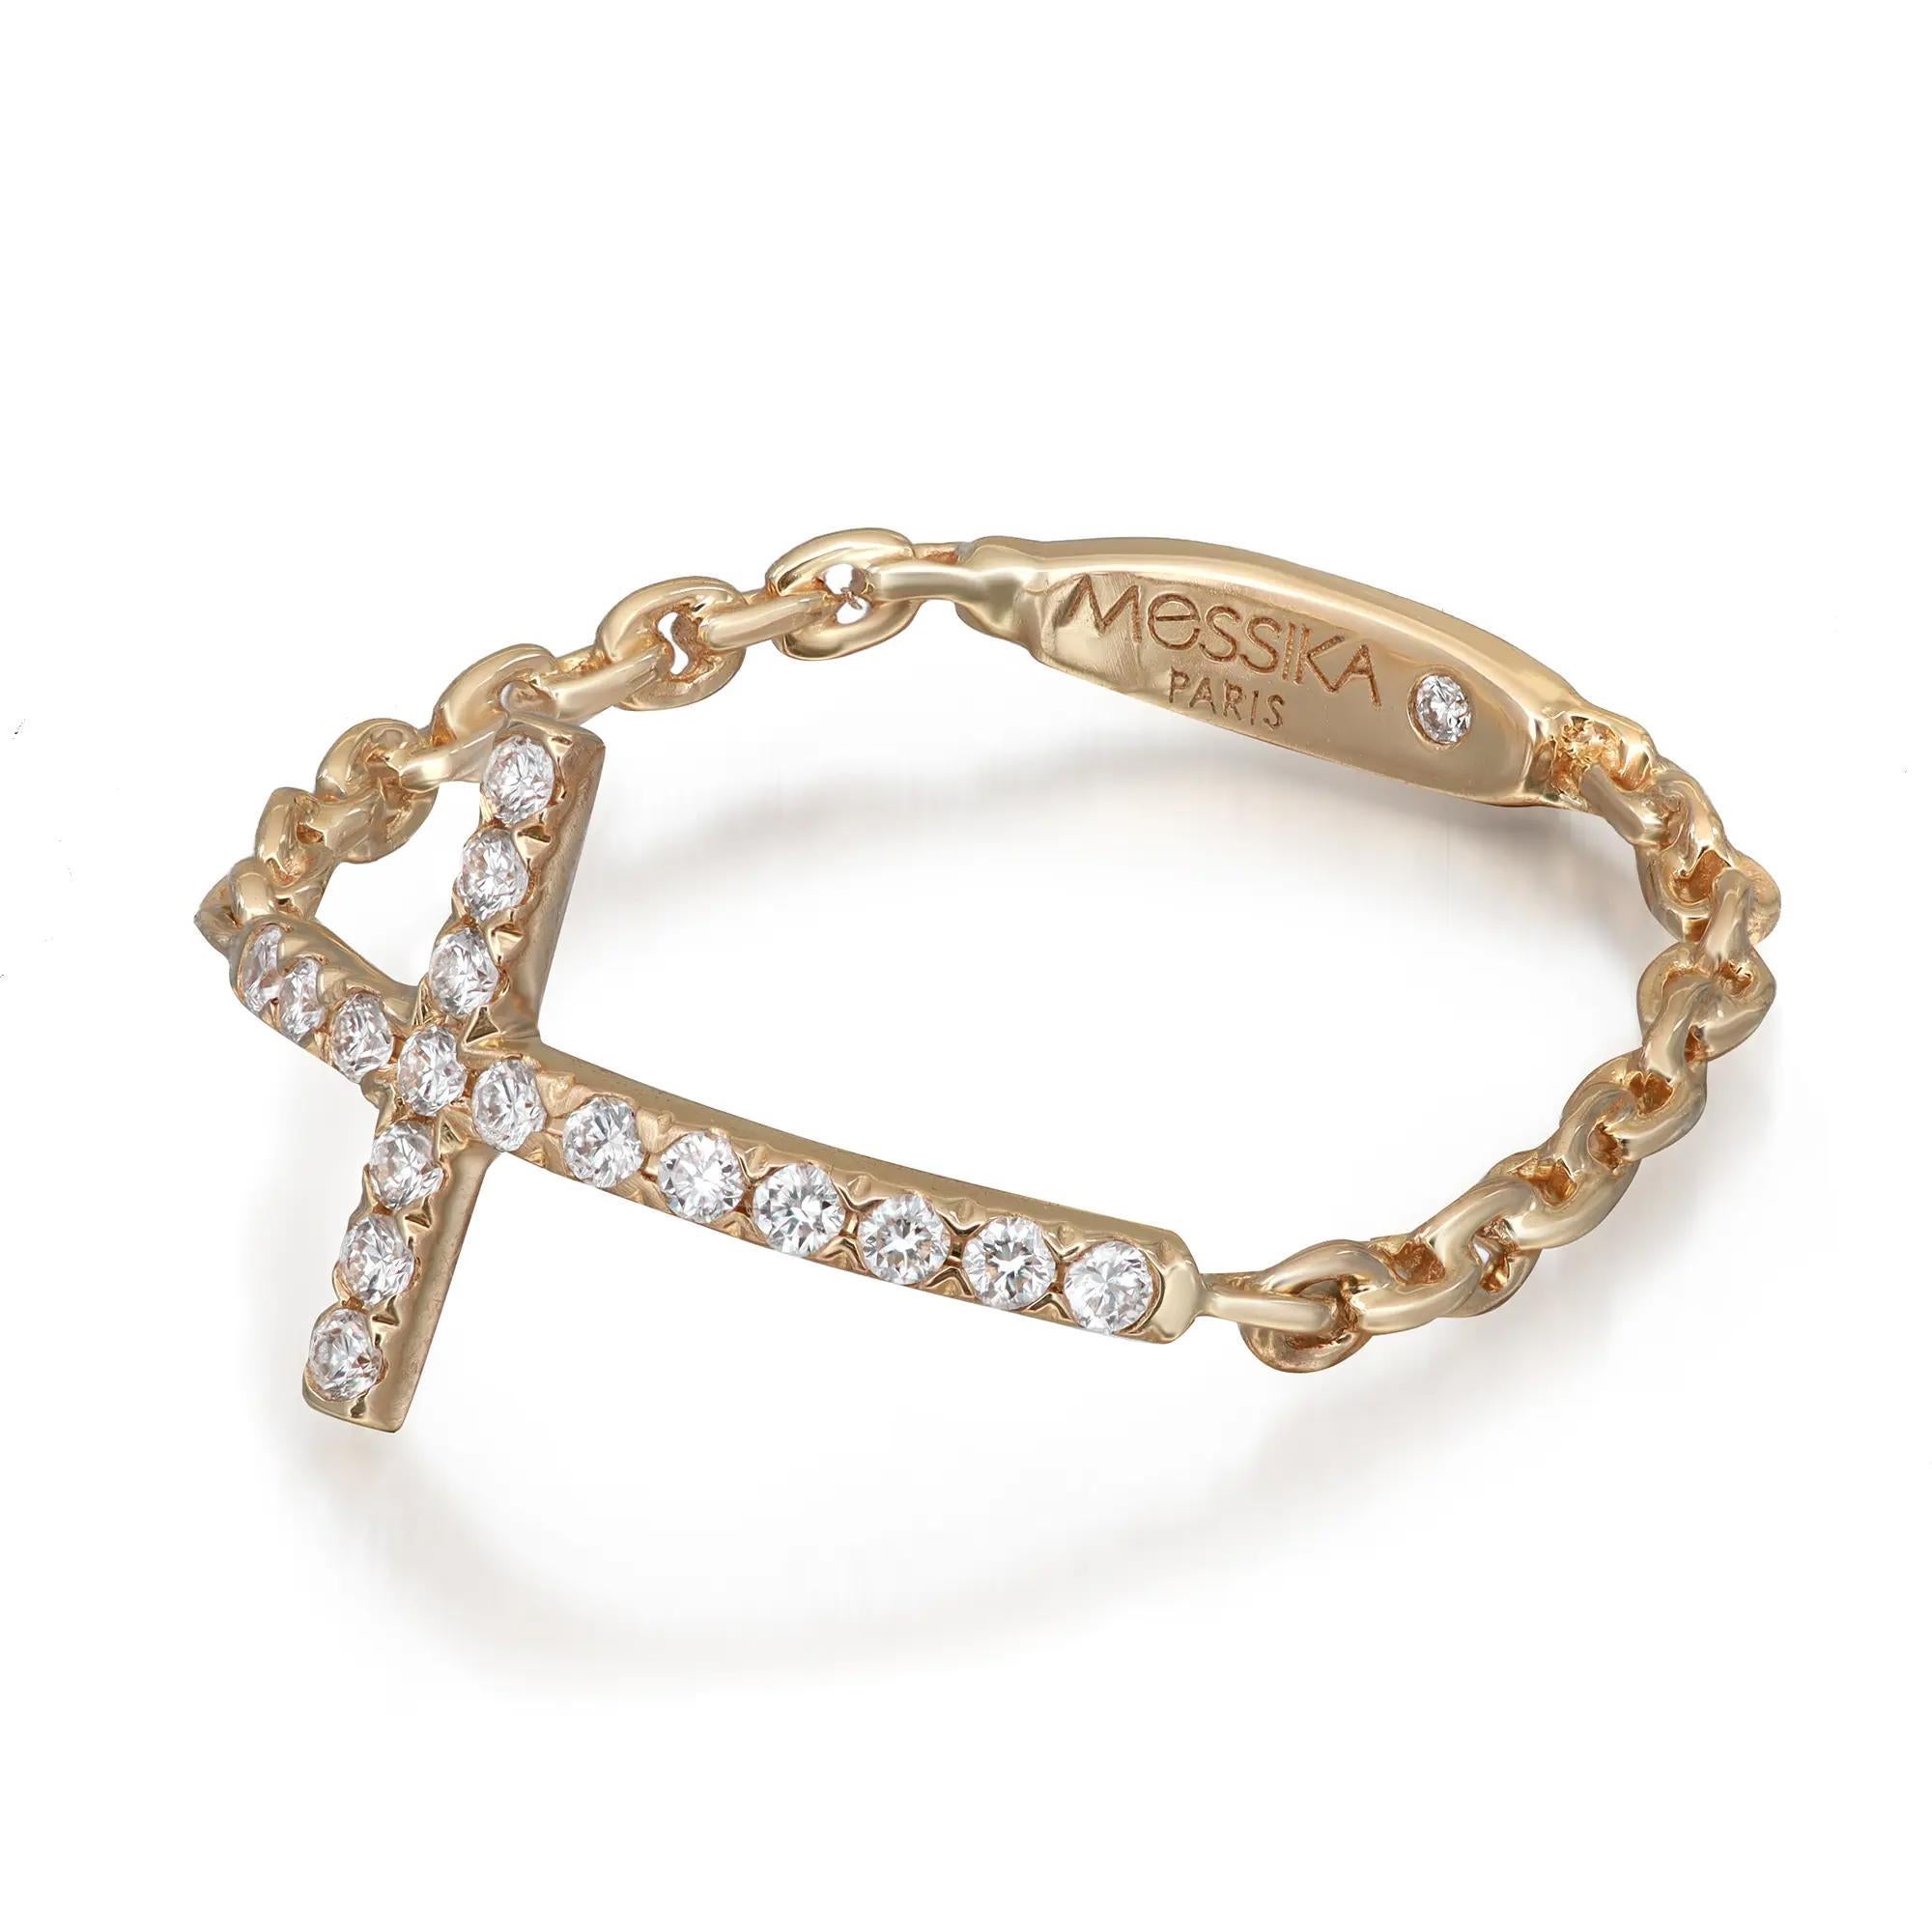 Modern Messika 0.11Cttw Croix Sur Chaine Diamond Ring 18K Yellow Gold Size 52 US 6 For Sale